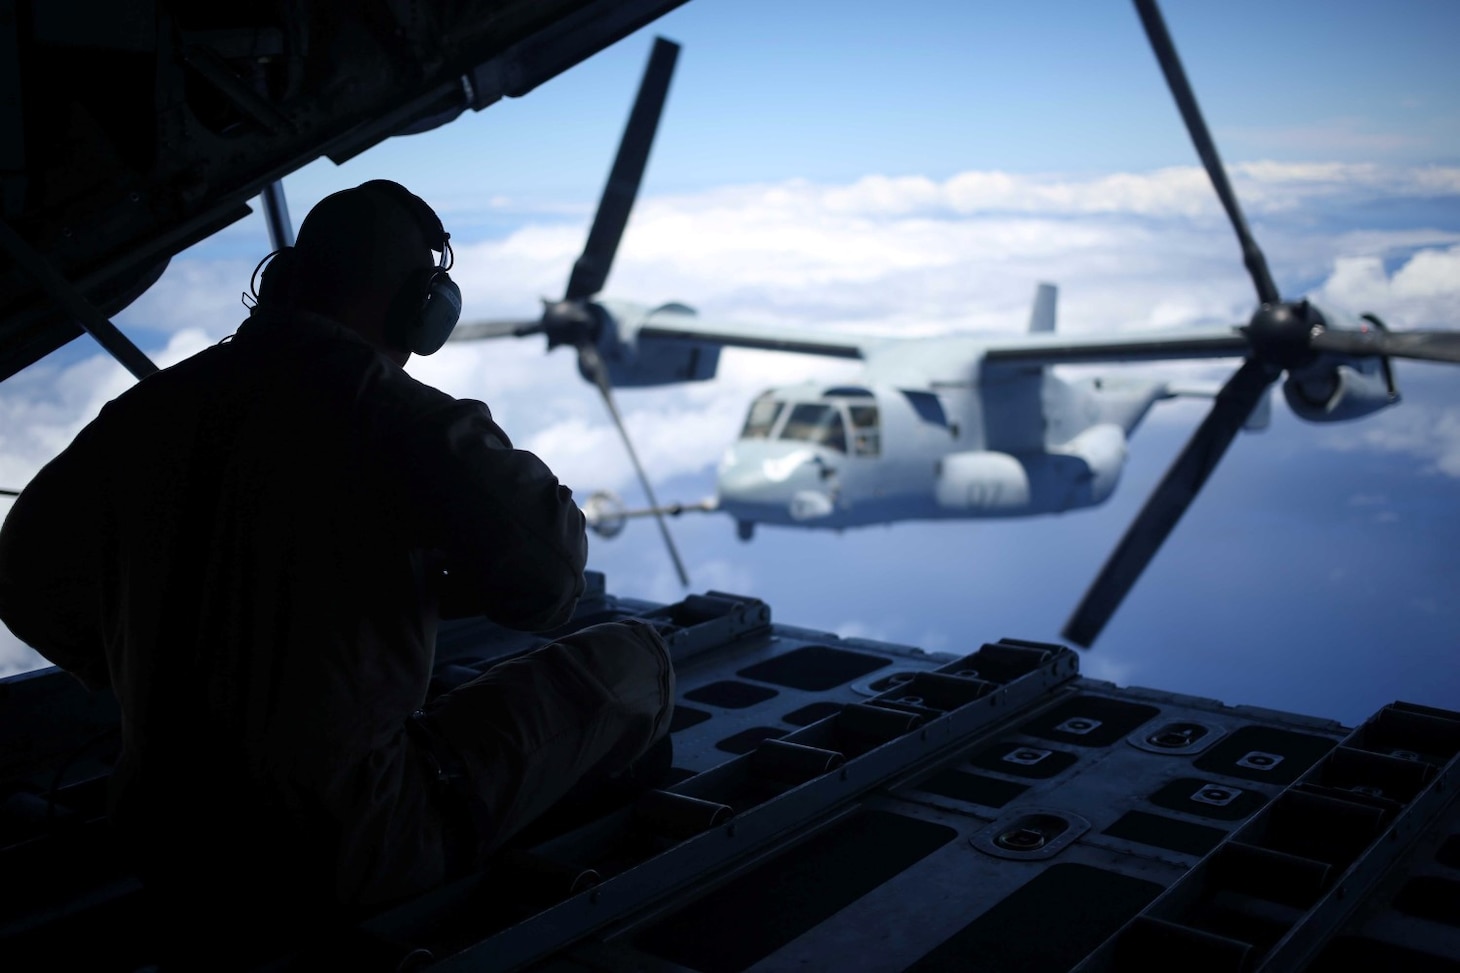 An MV-22B Osprey, with Marine Medium Tiltrotor Squadron 163, 11th Marine Expeditionary Unit, is refueled by a KC-130 en route to Hawaii, July 30th, 2014. Four Ospreys launched from the USS Makin Island and traveled more than 800 nautical miles to insert an element of Marines into a simulated Embassy compound. The MEU departed San Diego on July 25 and is currently deployed as part of WESTPAC 14-2. (U.S. Marine Corps photo by Lance Cpl. Evan R. White/Released)